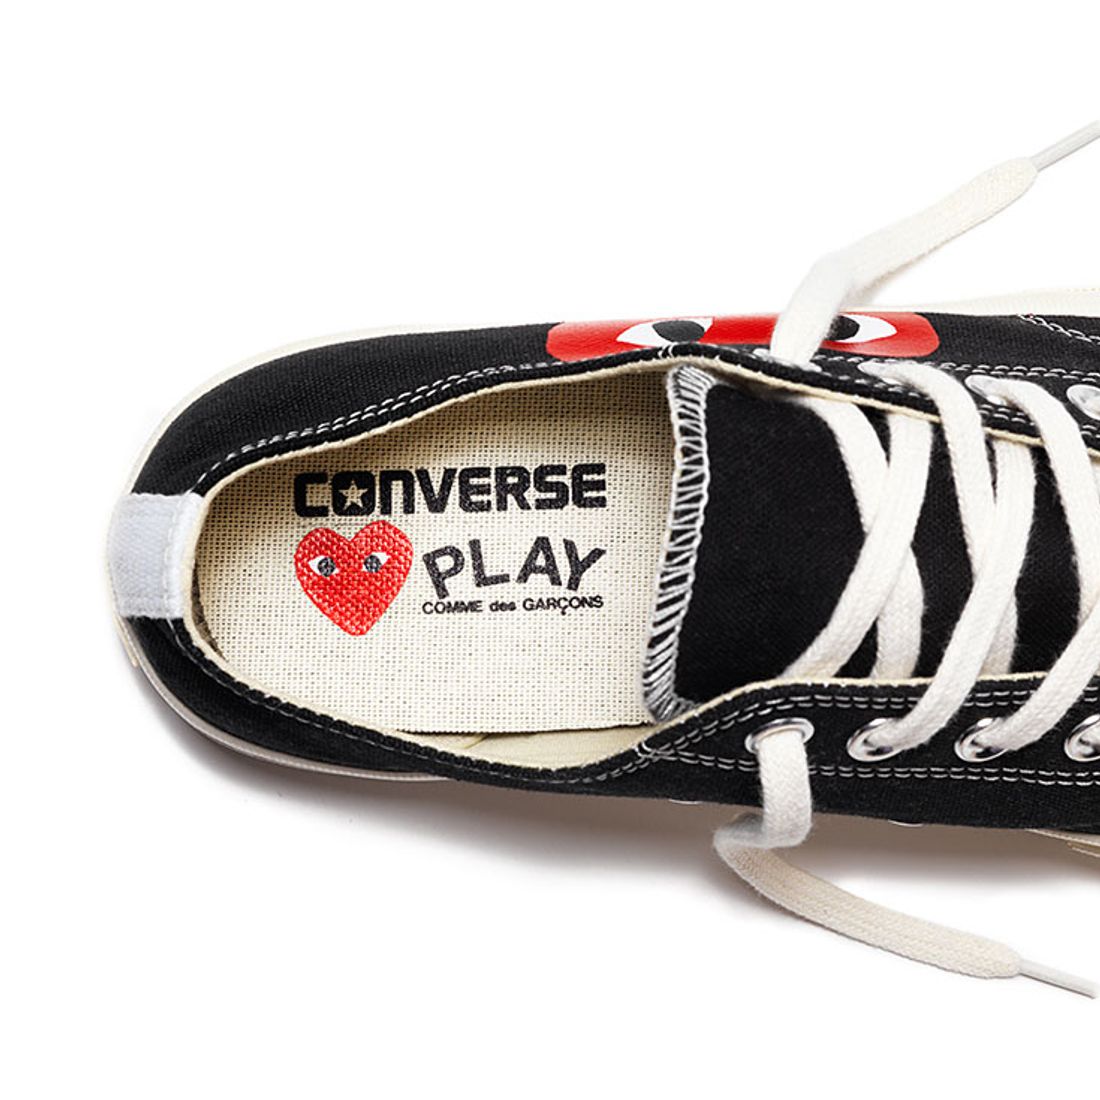 Dependence Medical malpractice Exactly The Decade's Most Influential Sneaker was the Comme des Garçons Play… -  Sneaker Freaker